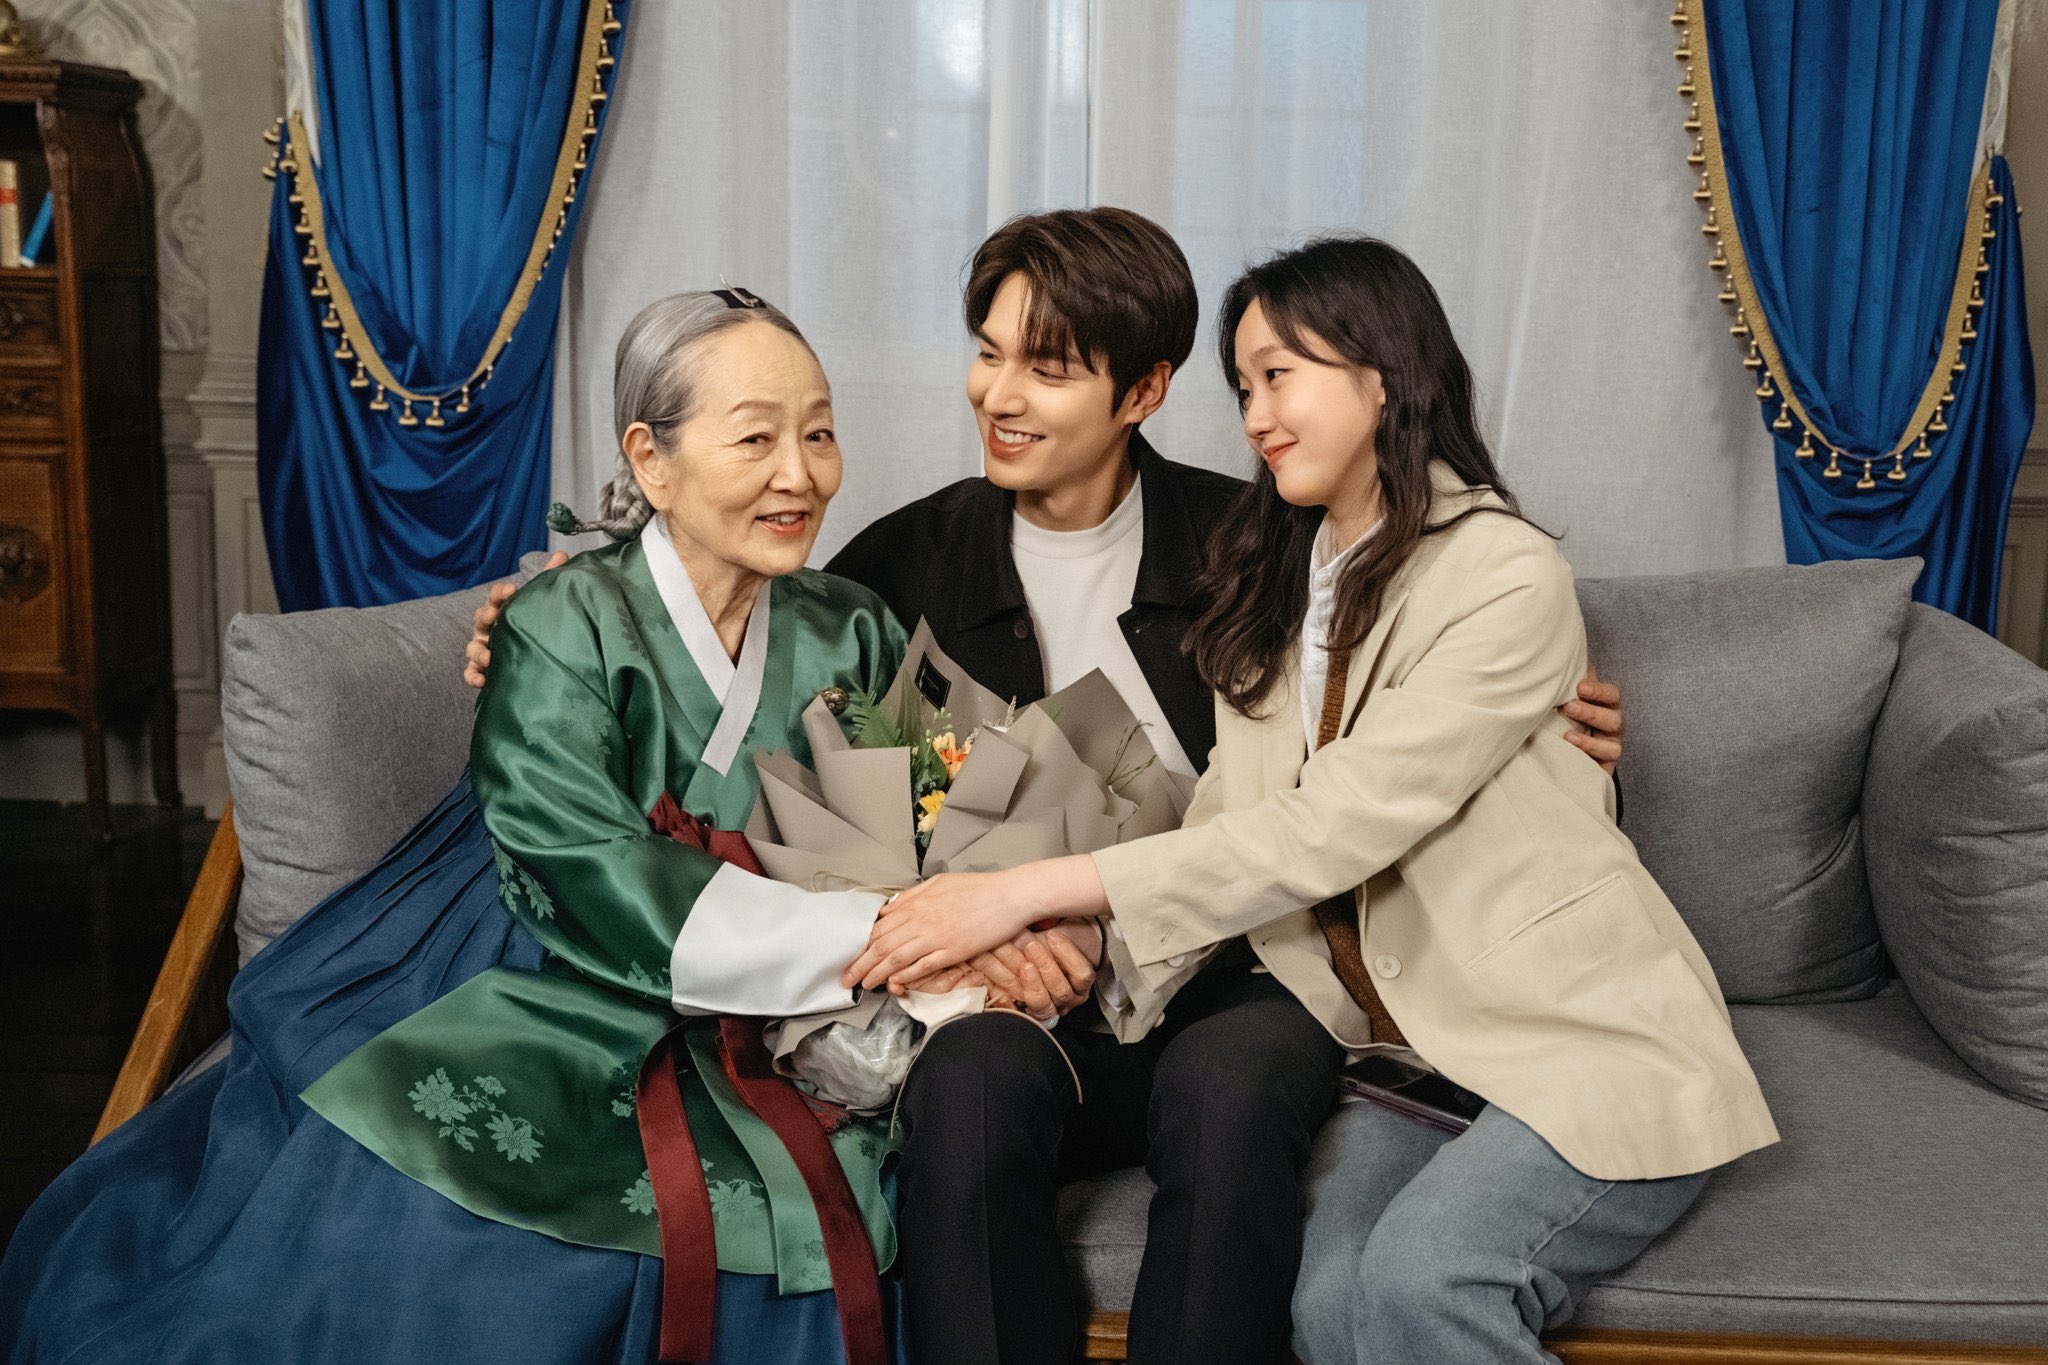 The King: Eternal Monarch on Twitter: &amp;quot;Heartwarming photos of Kim Young Ok with Lee Min Ho and Kim Go Eun! #TheKingEternalMonarch #TheKingEternalMonarchFinale #TheKingEternalMonarchep16 https://t.co/v5S56OpRiR&amp;quot; / Twitter